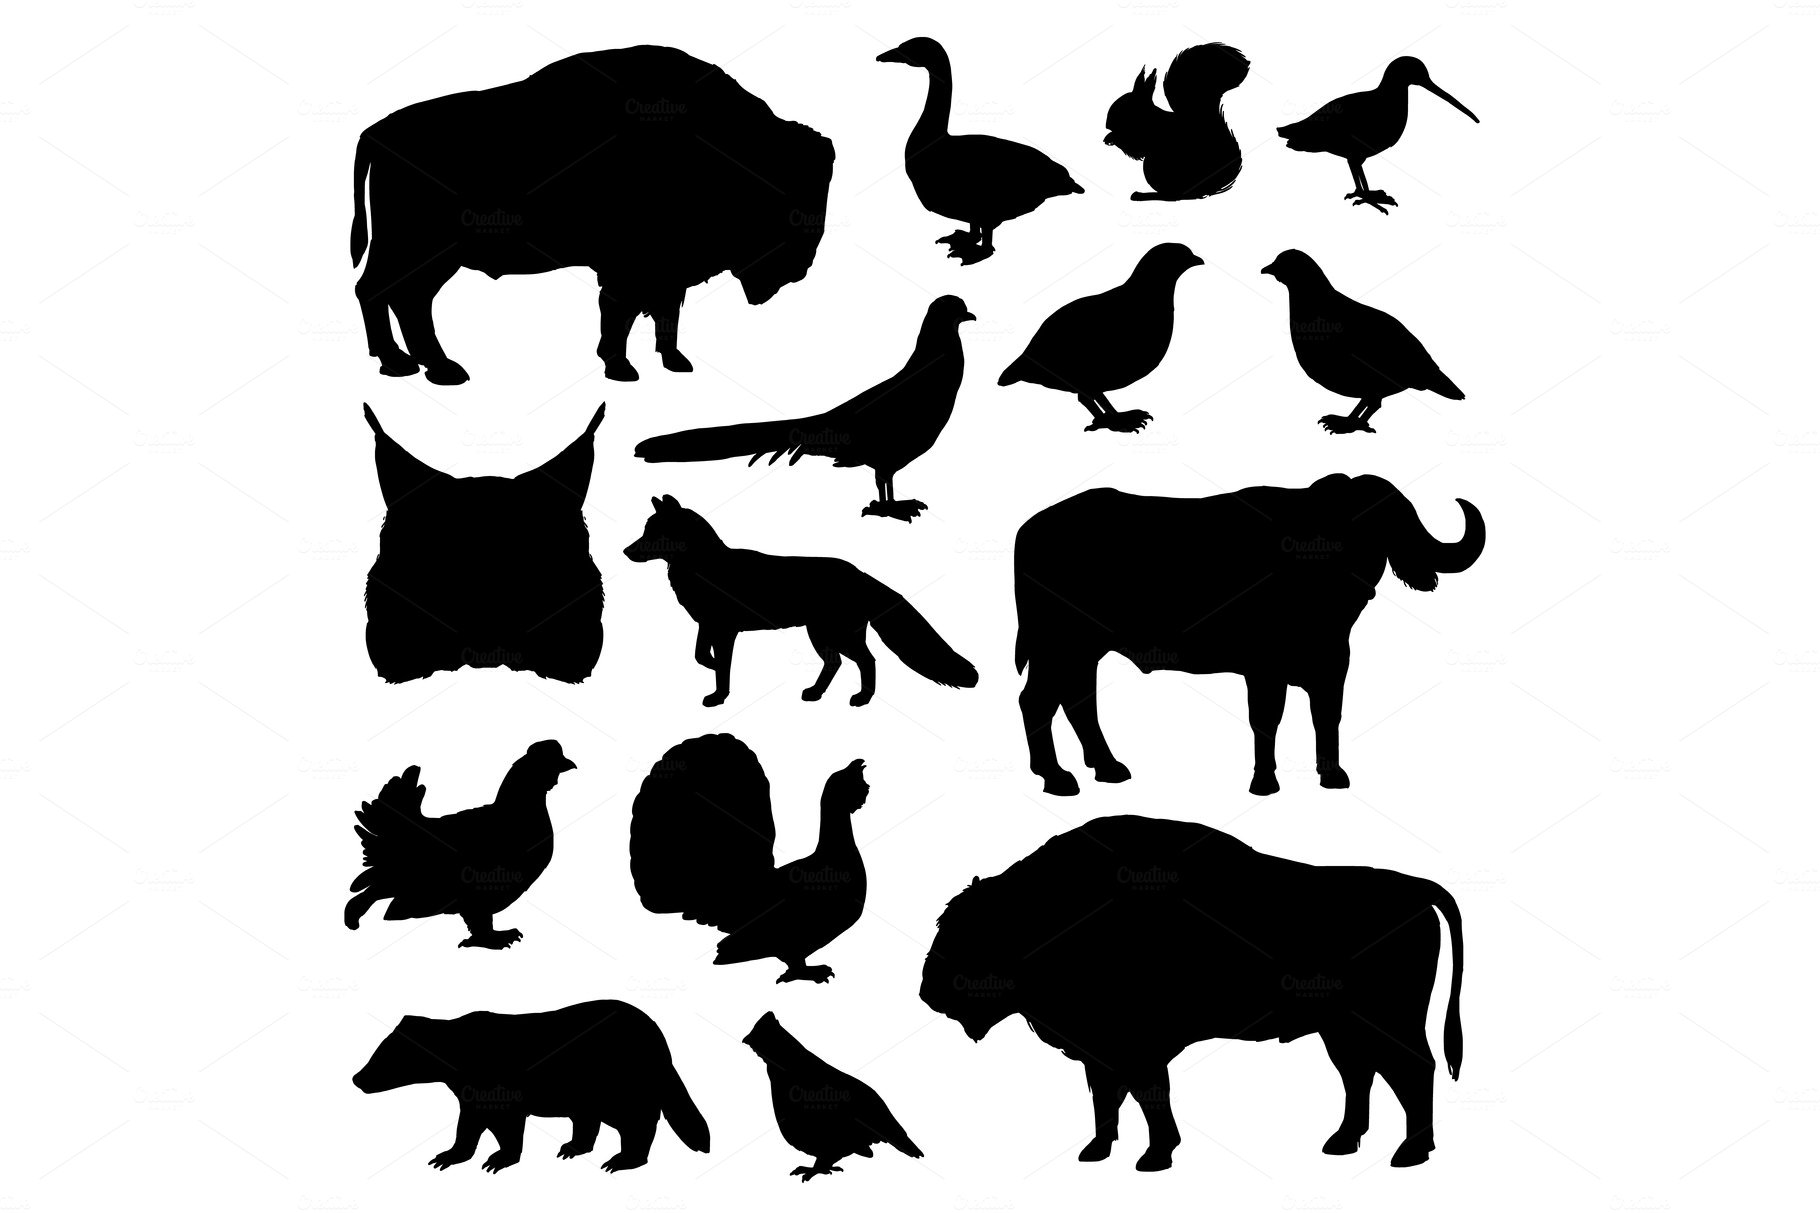 Hunting birds and animal silhouettes cover image.